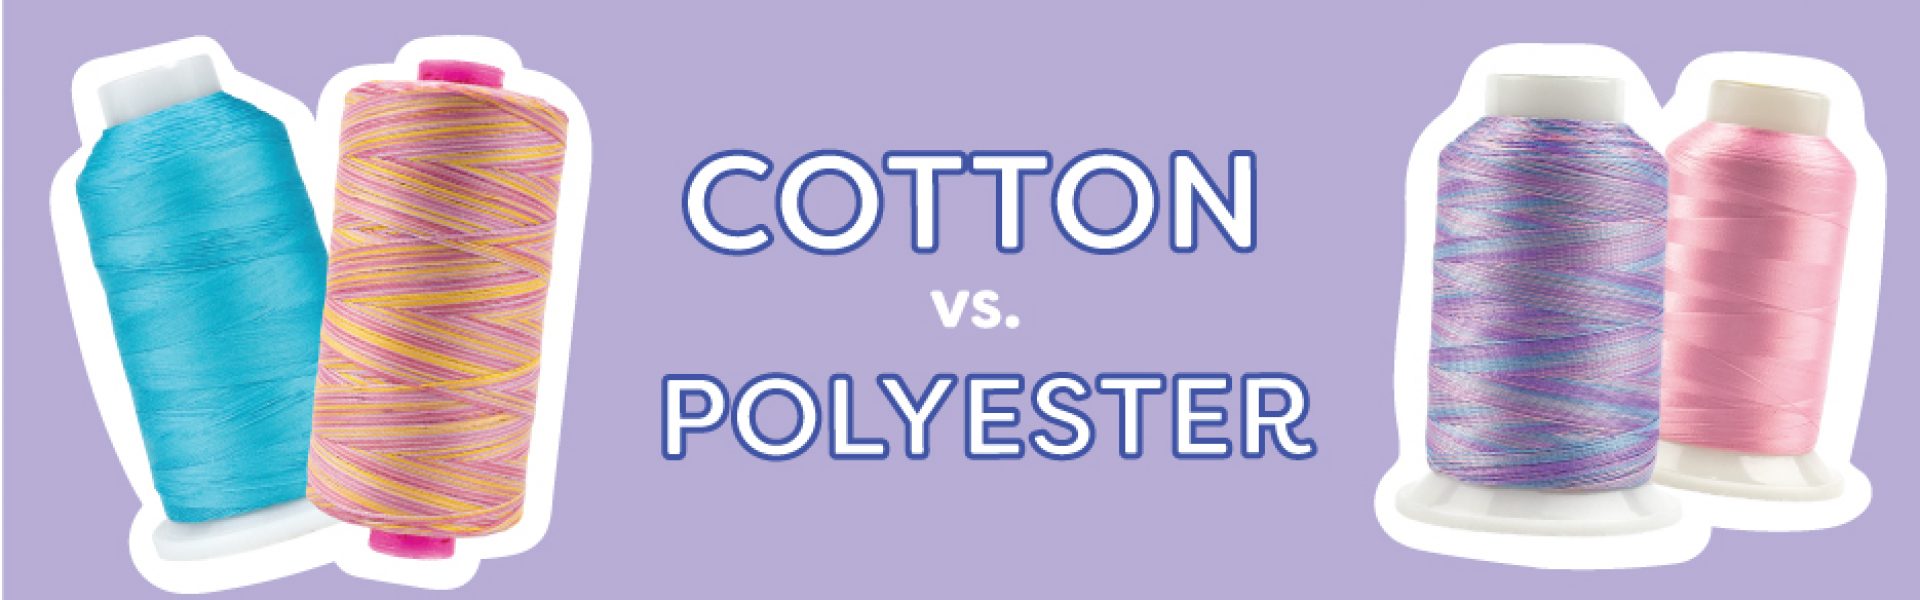 an image of cotton and polyester threads meant for quilting